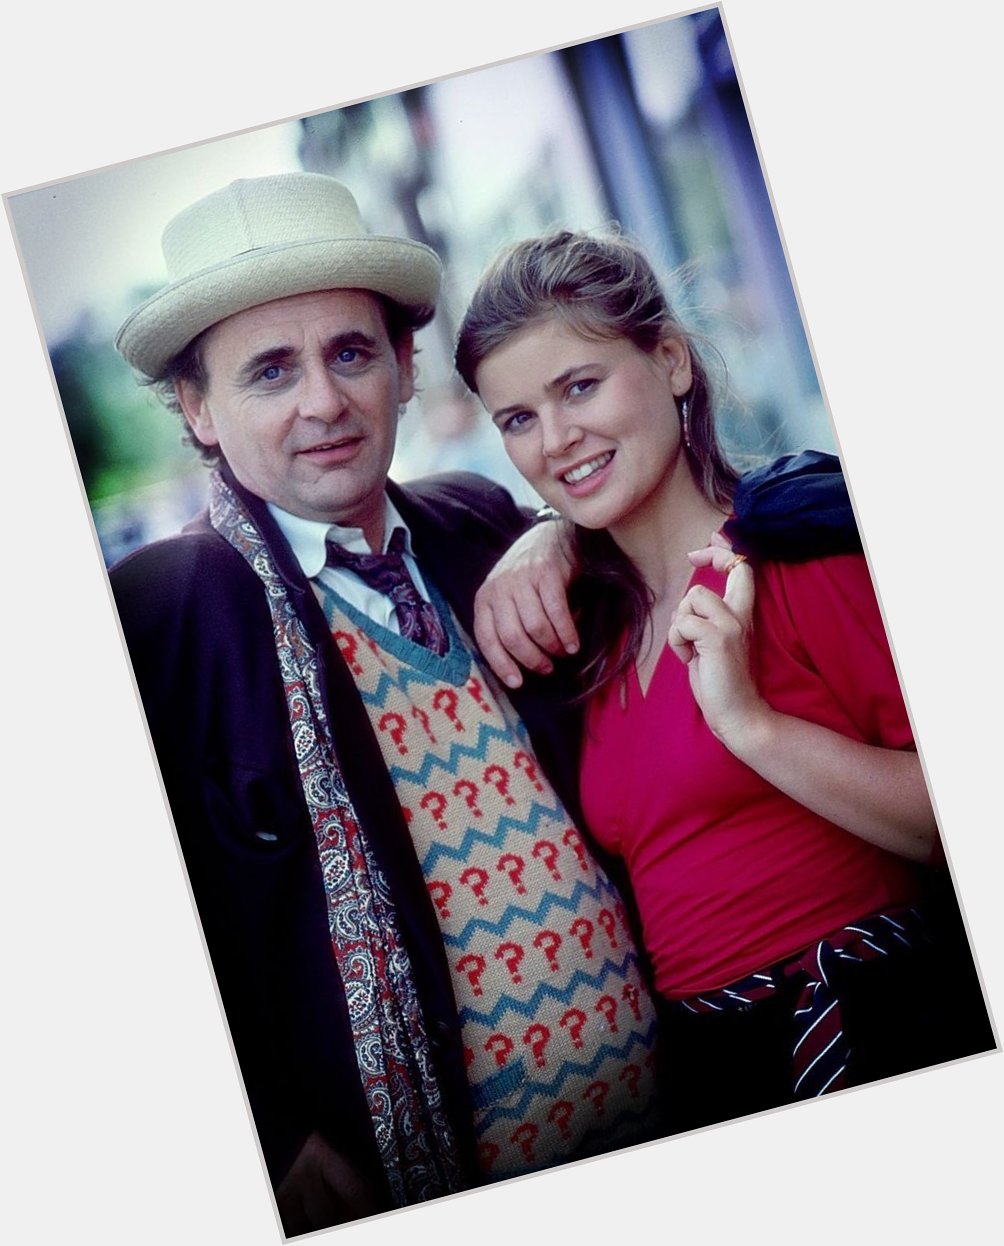 Wishing a very happy birthday to Sylvester McCoy and Sophie Aldred aka The Doctor and Ace!     